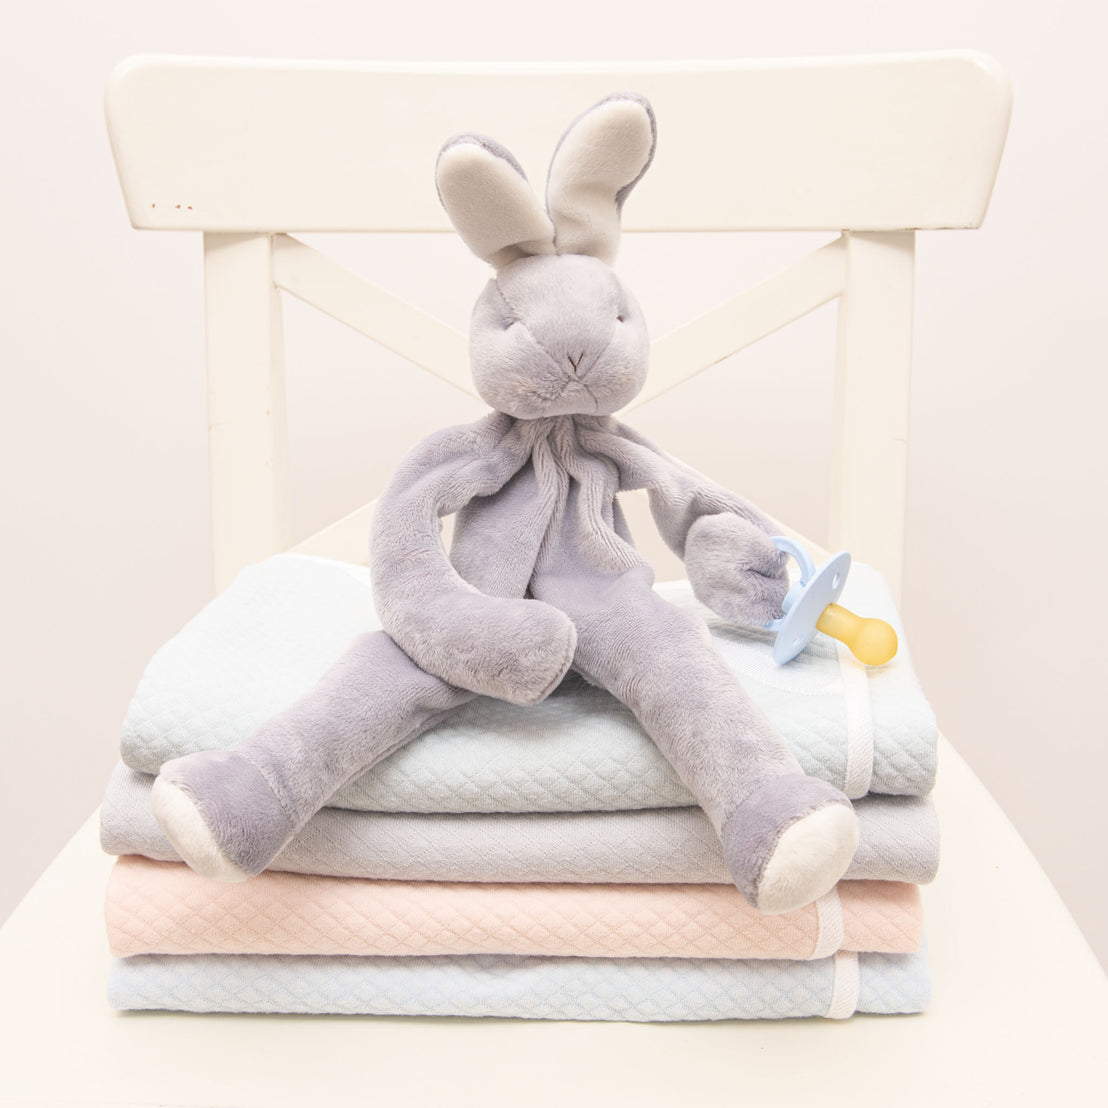 Flat lay photo of the Asher Silly Bunny Buddy, a soft stuffed animal bunny (made from a soft velour in grey) that holds on to a pacifier.